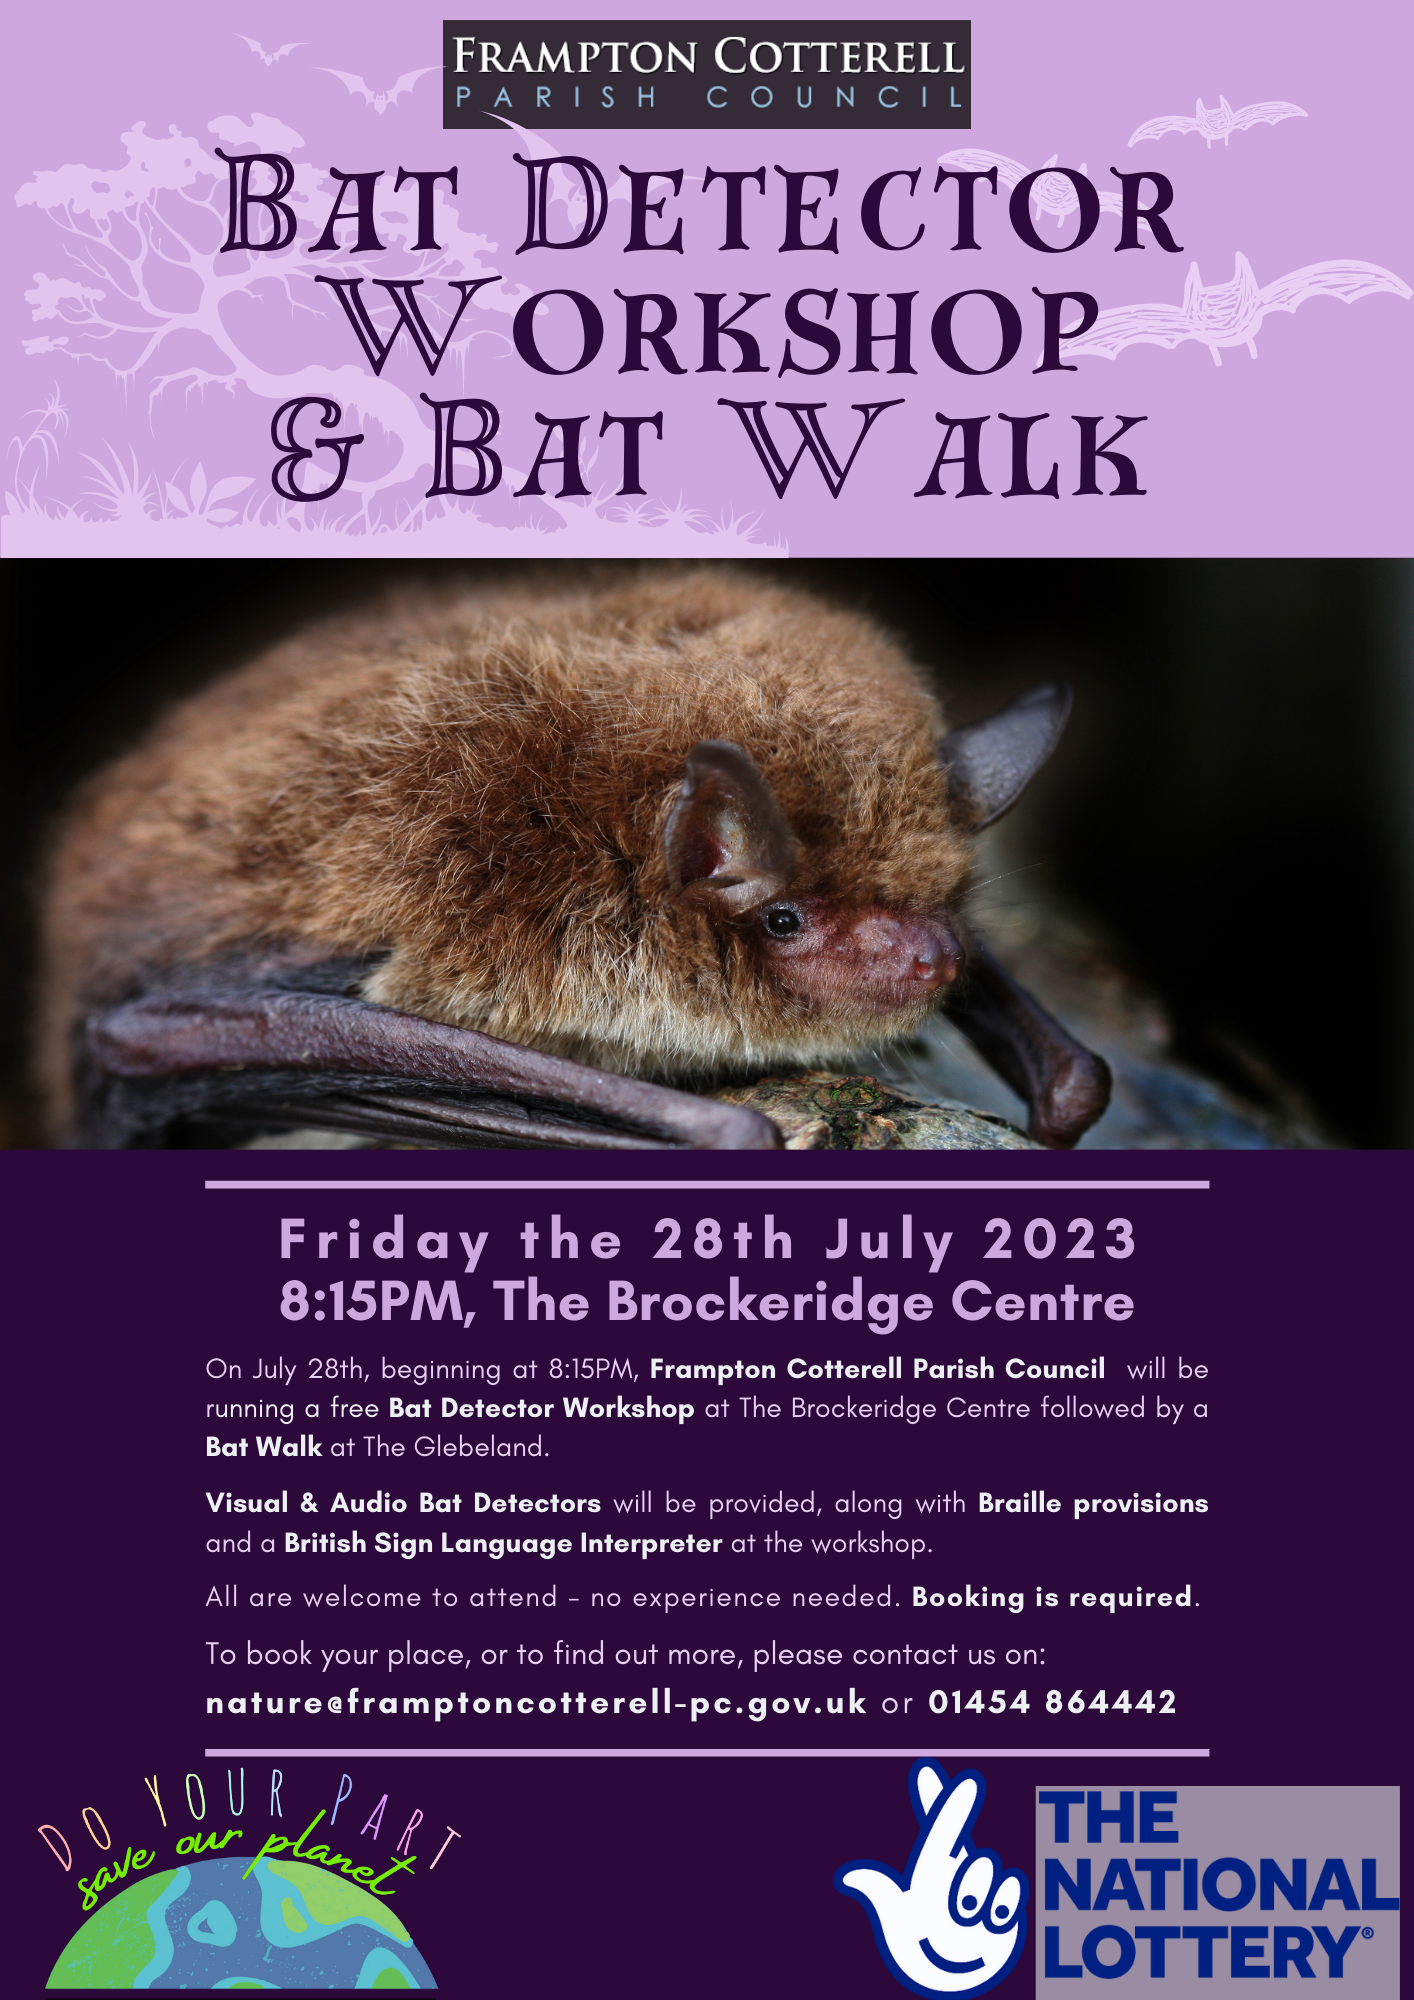 Poster with a photograph of a bat. Text reads: Frampton Cotterell Parish Council. Bat Detector Workshop & Bat Walk. Friday the 28th July 2023, 8:15PM, The Brockeridge Centre. On July 28th, beginning at 8:15PM, Frampton Cotterell Parish Council will be running a free Bat Detector Workshop at The Brockeridge Centre followed by a Bat Walk at The Glebeland. Visual & Audio Bat Detectors will be provided, along with Braille provisions and a British Sign Language Interpreter at the workshop. All are welcome to attend - no experience needed. Booking is required. To book your place, or to find out more, please contact us on: nature@framptoncotterell-pc.gov.uk or 01454 864442. / Logos: The National Lottery, and Frampton Cotterell Parish Council Climate & Nature.